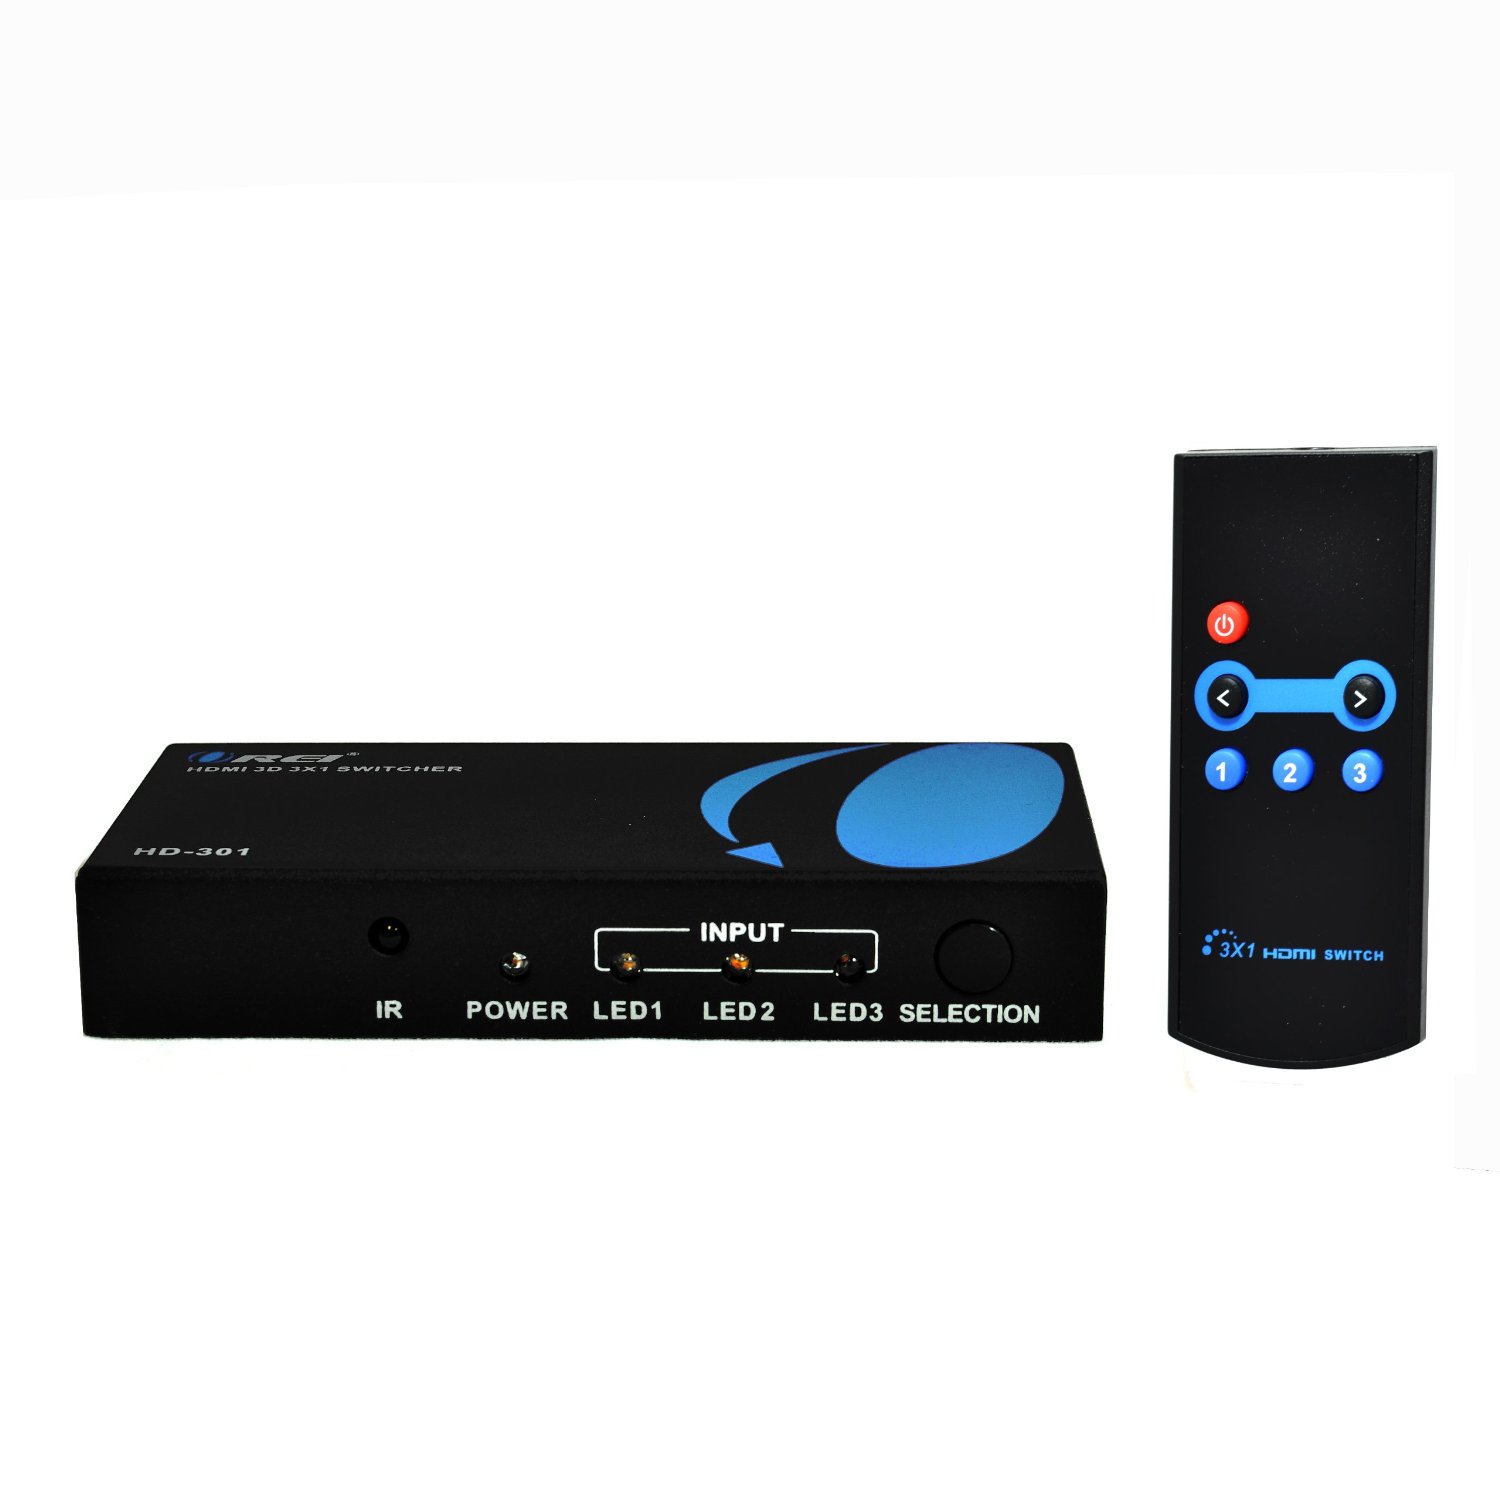 HD-301 3x1 3-Port HDMI Powered Switcher for Full HD 1080P and 3D Support - Remote Control (3 inputs, 1 outputs)